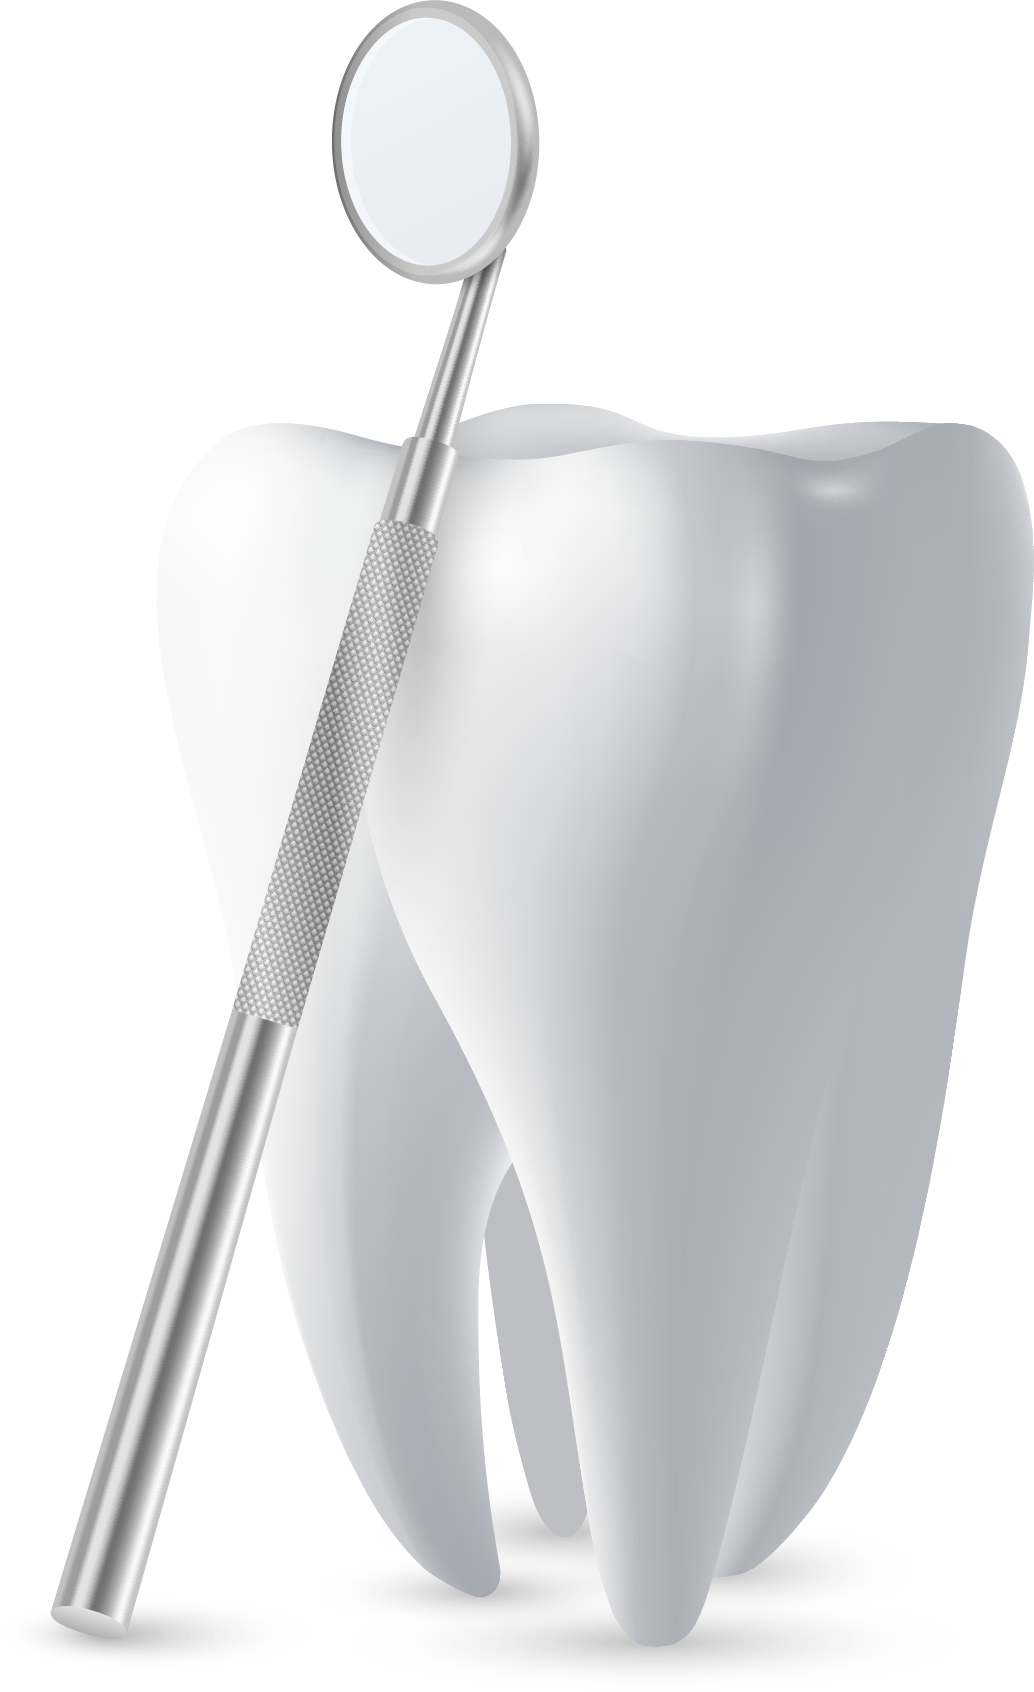 Tooth with Dentist Equipment 1 - Charlotte, NC - Northlake Dentistry